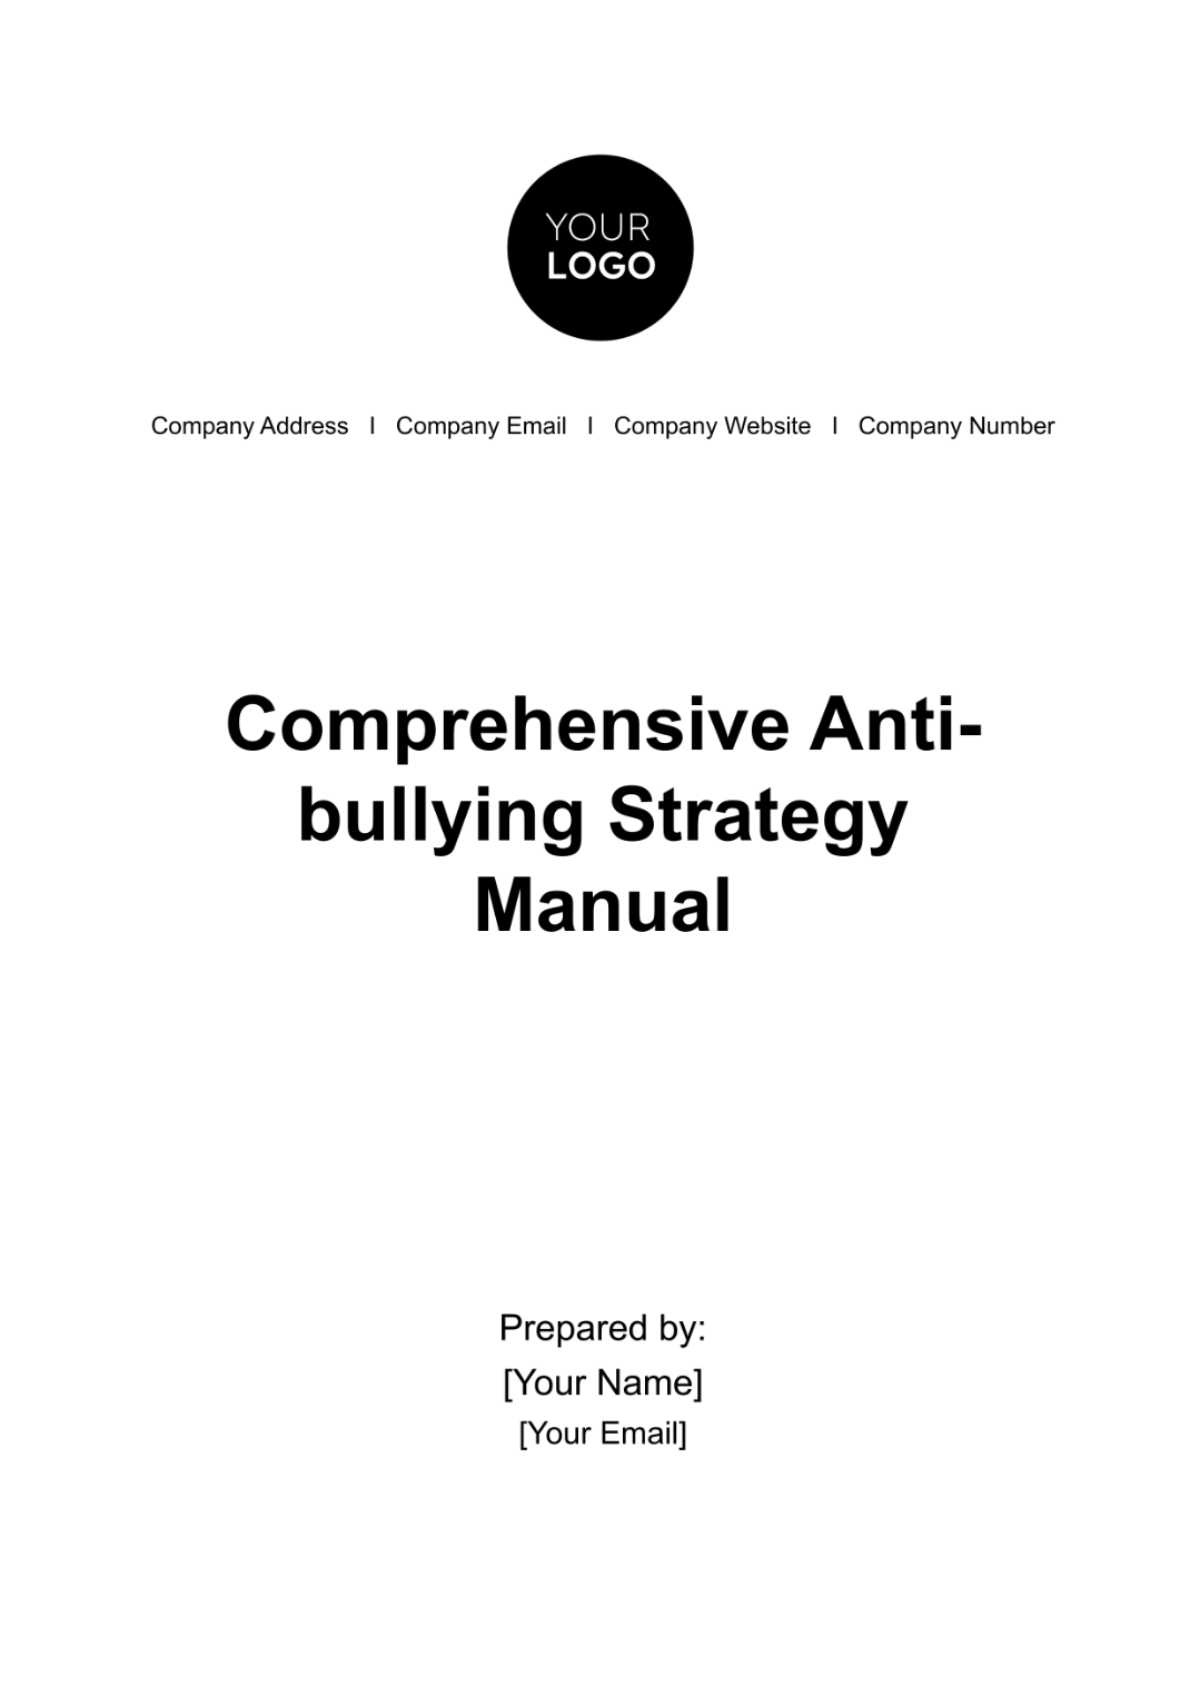 Free Comprehensive Anti-bullying Strategy Manual HR Template